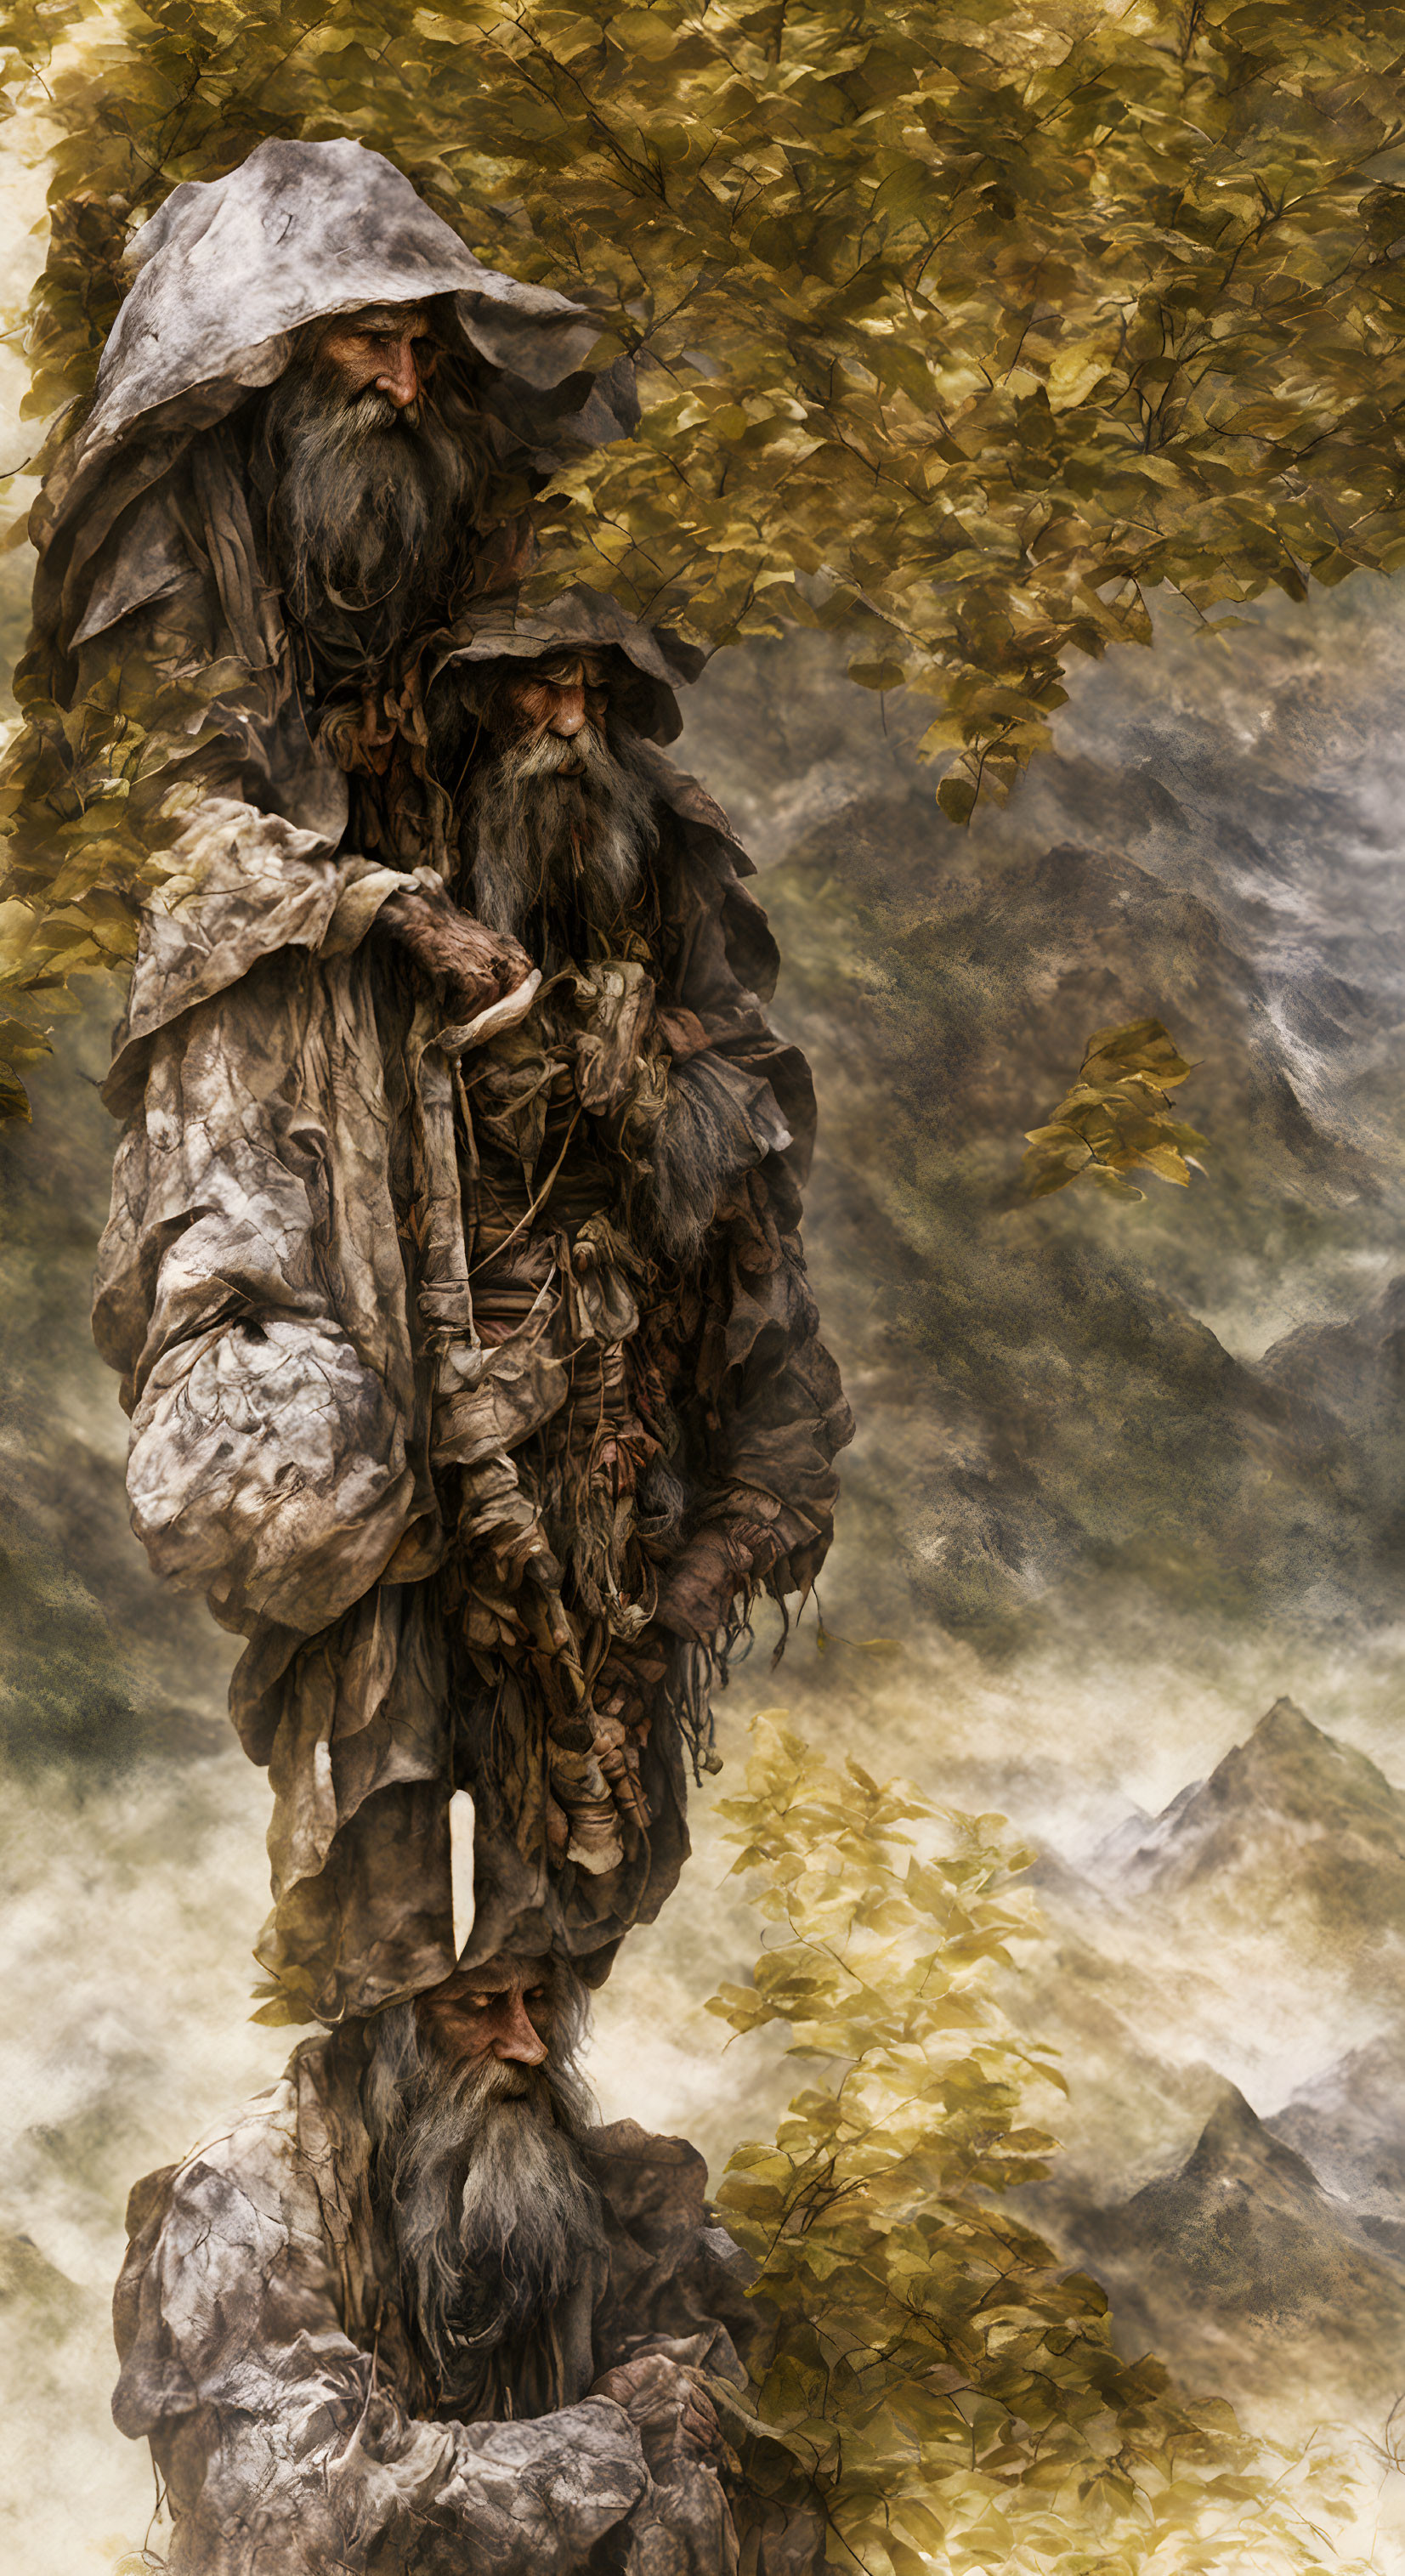 Three aged, bearded figures in earth-toned robes blend into misty forest background